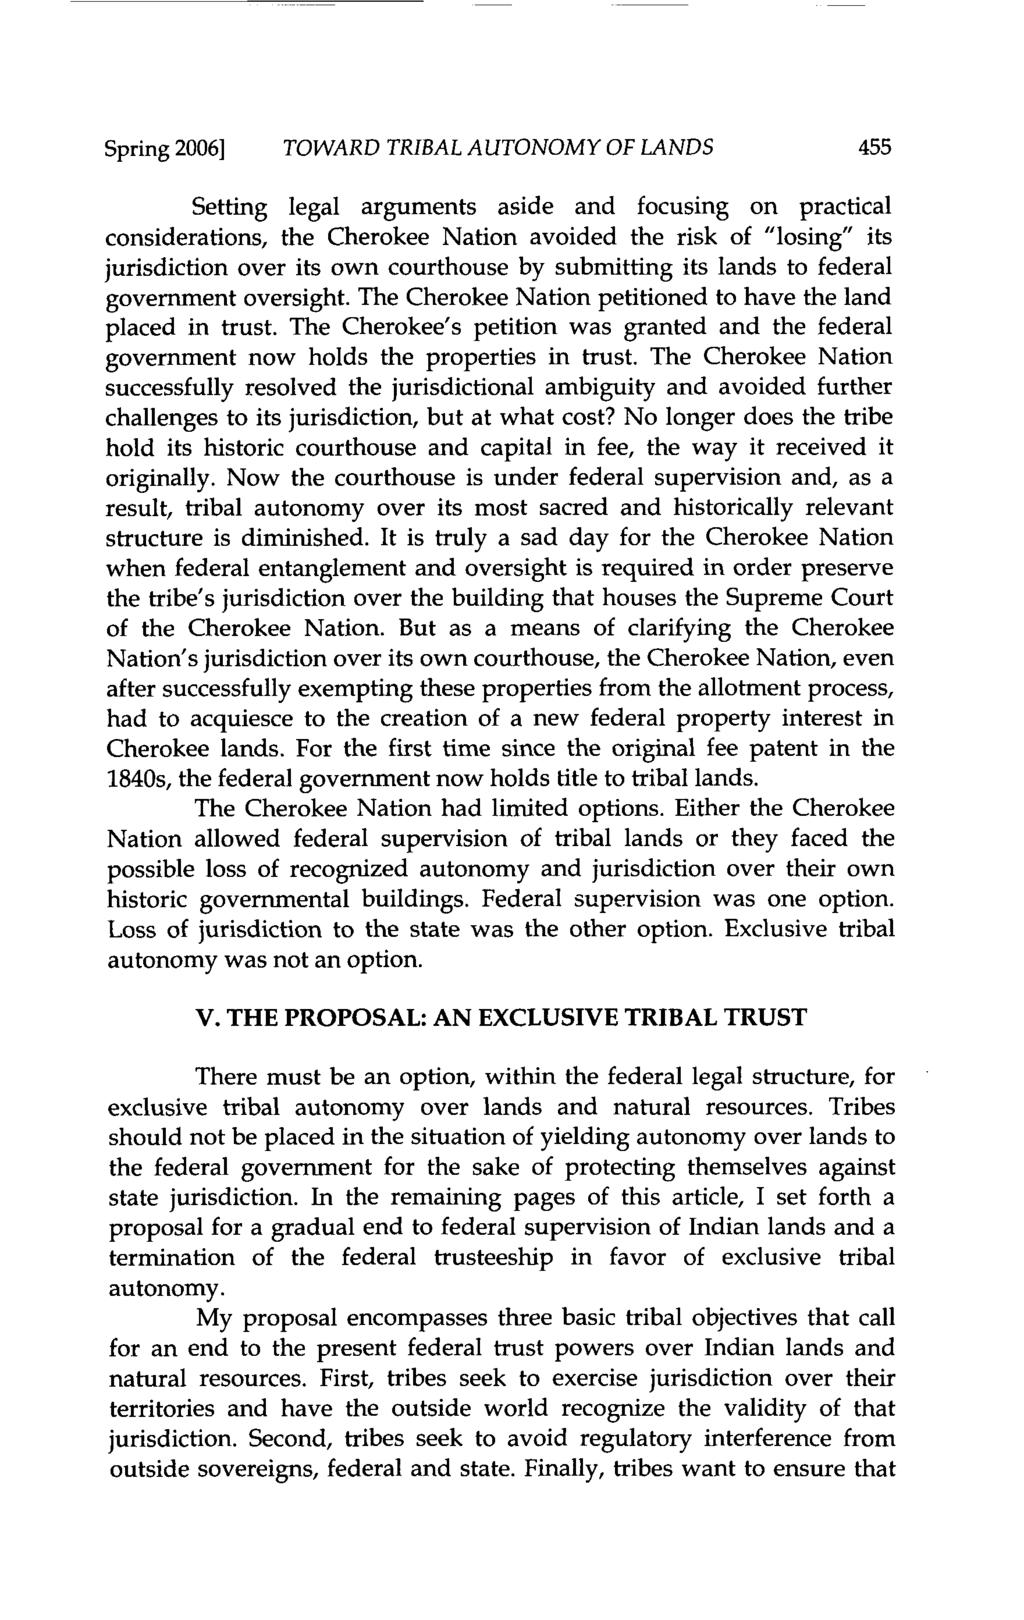 Spring 2006] TOWARD TRIBAL AUTONOMY OF LANDS 455 Setting legal arguments aside and focusing on practical considerations, the Cherokee Nation avoided the risk of "losing" its jurisdiction over its own